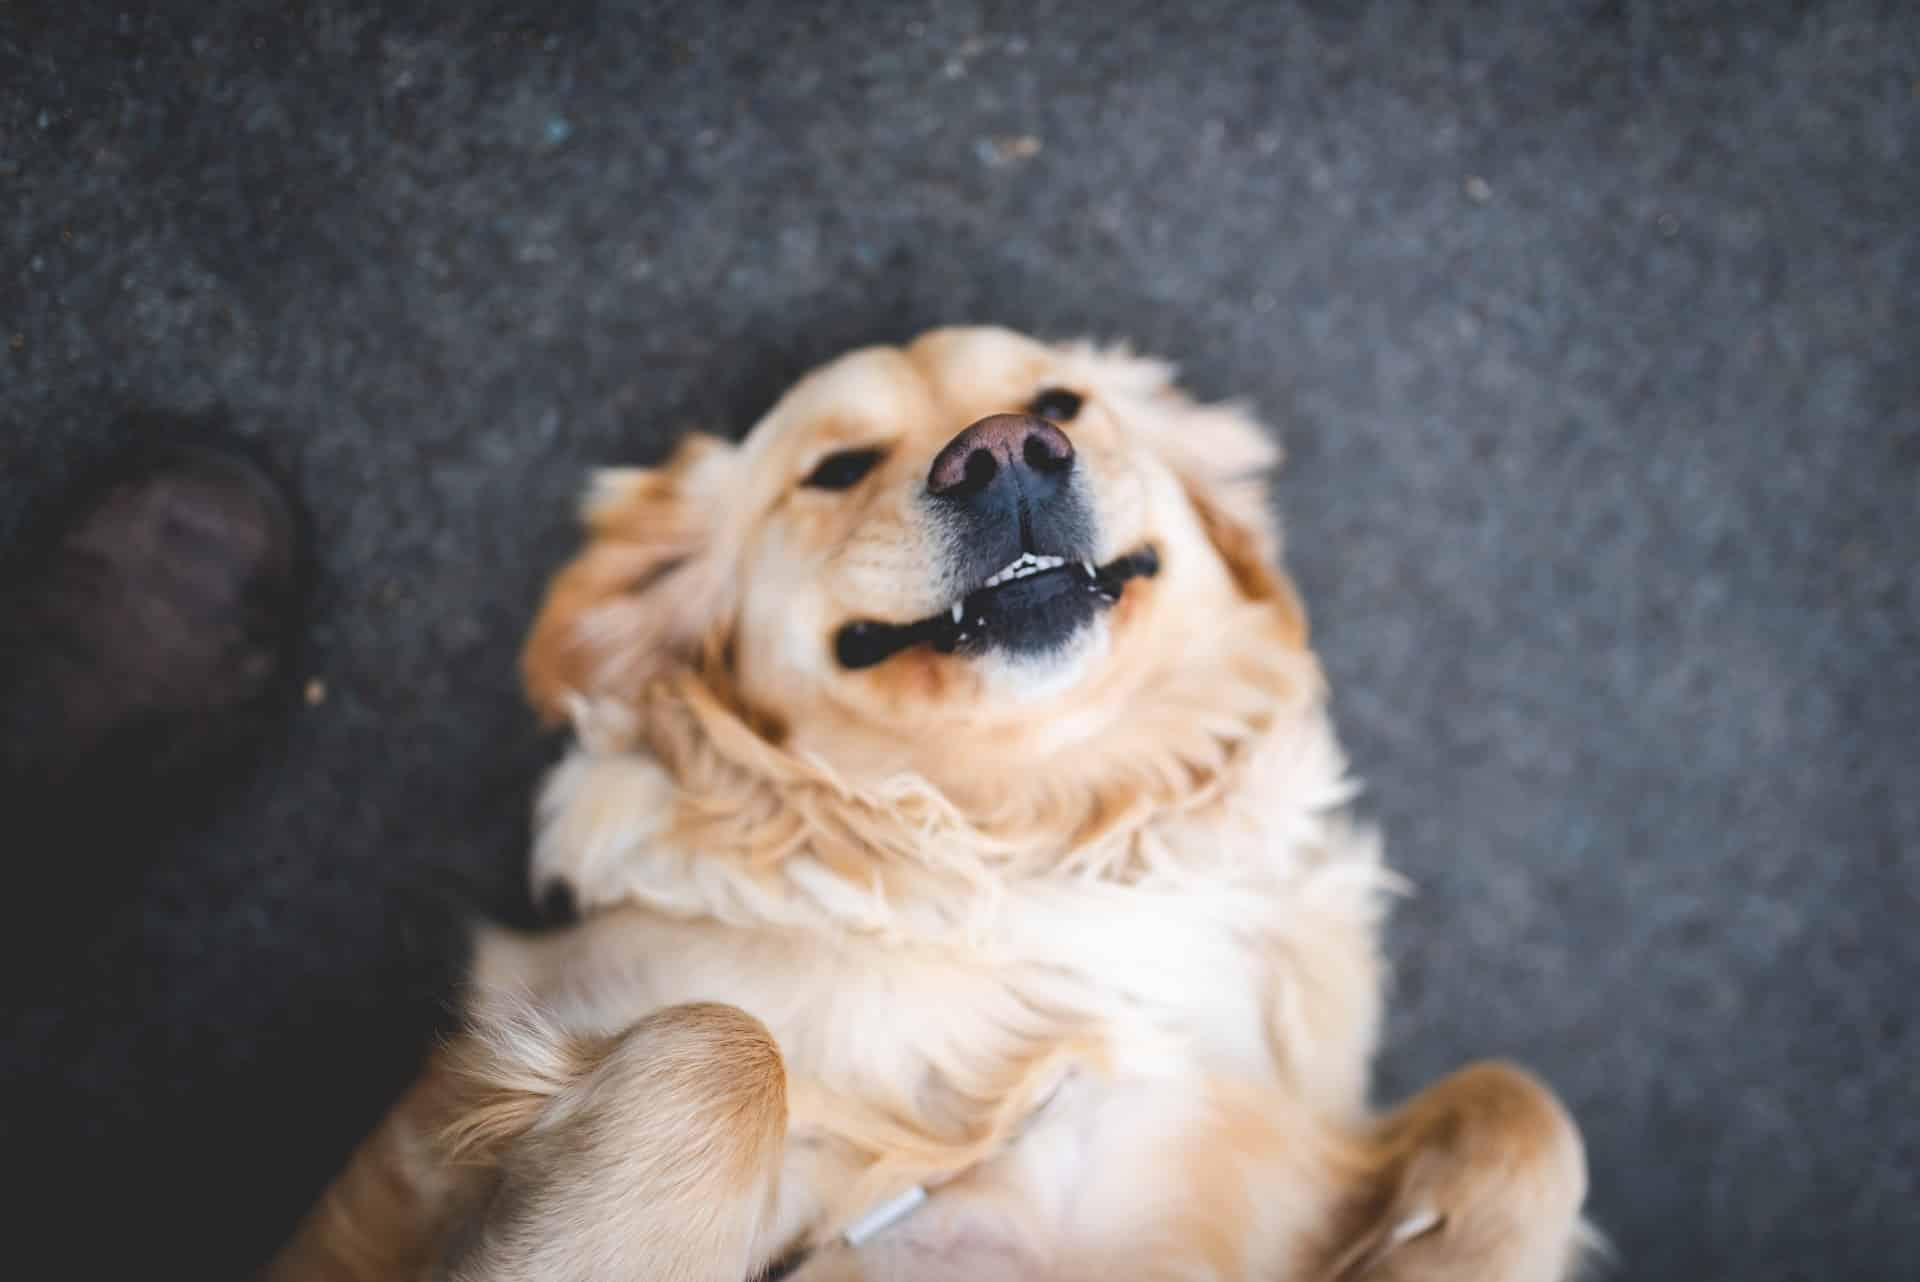 A dog on its back smiling